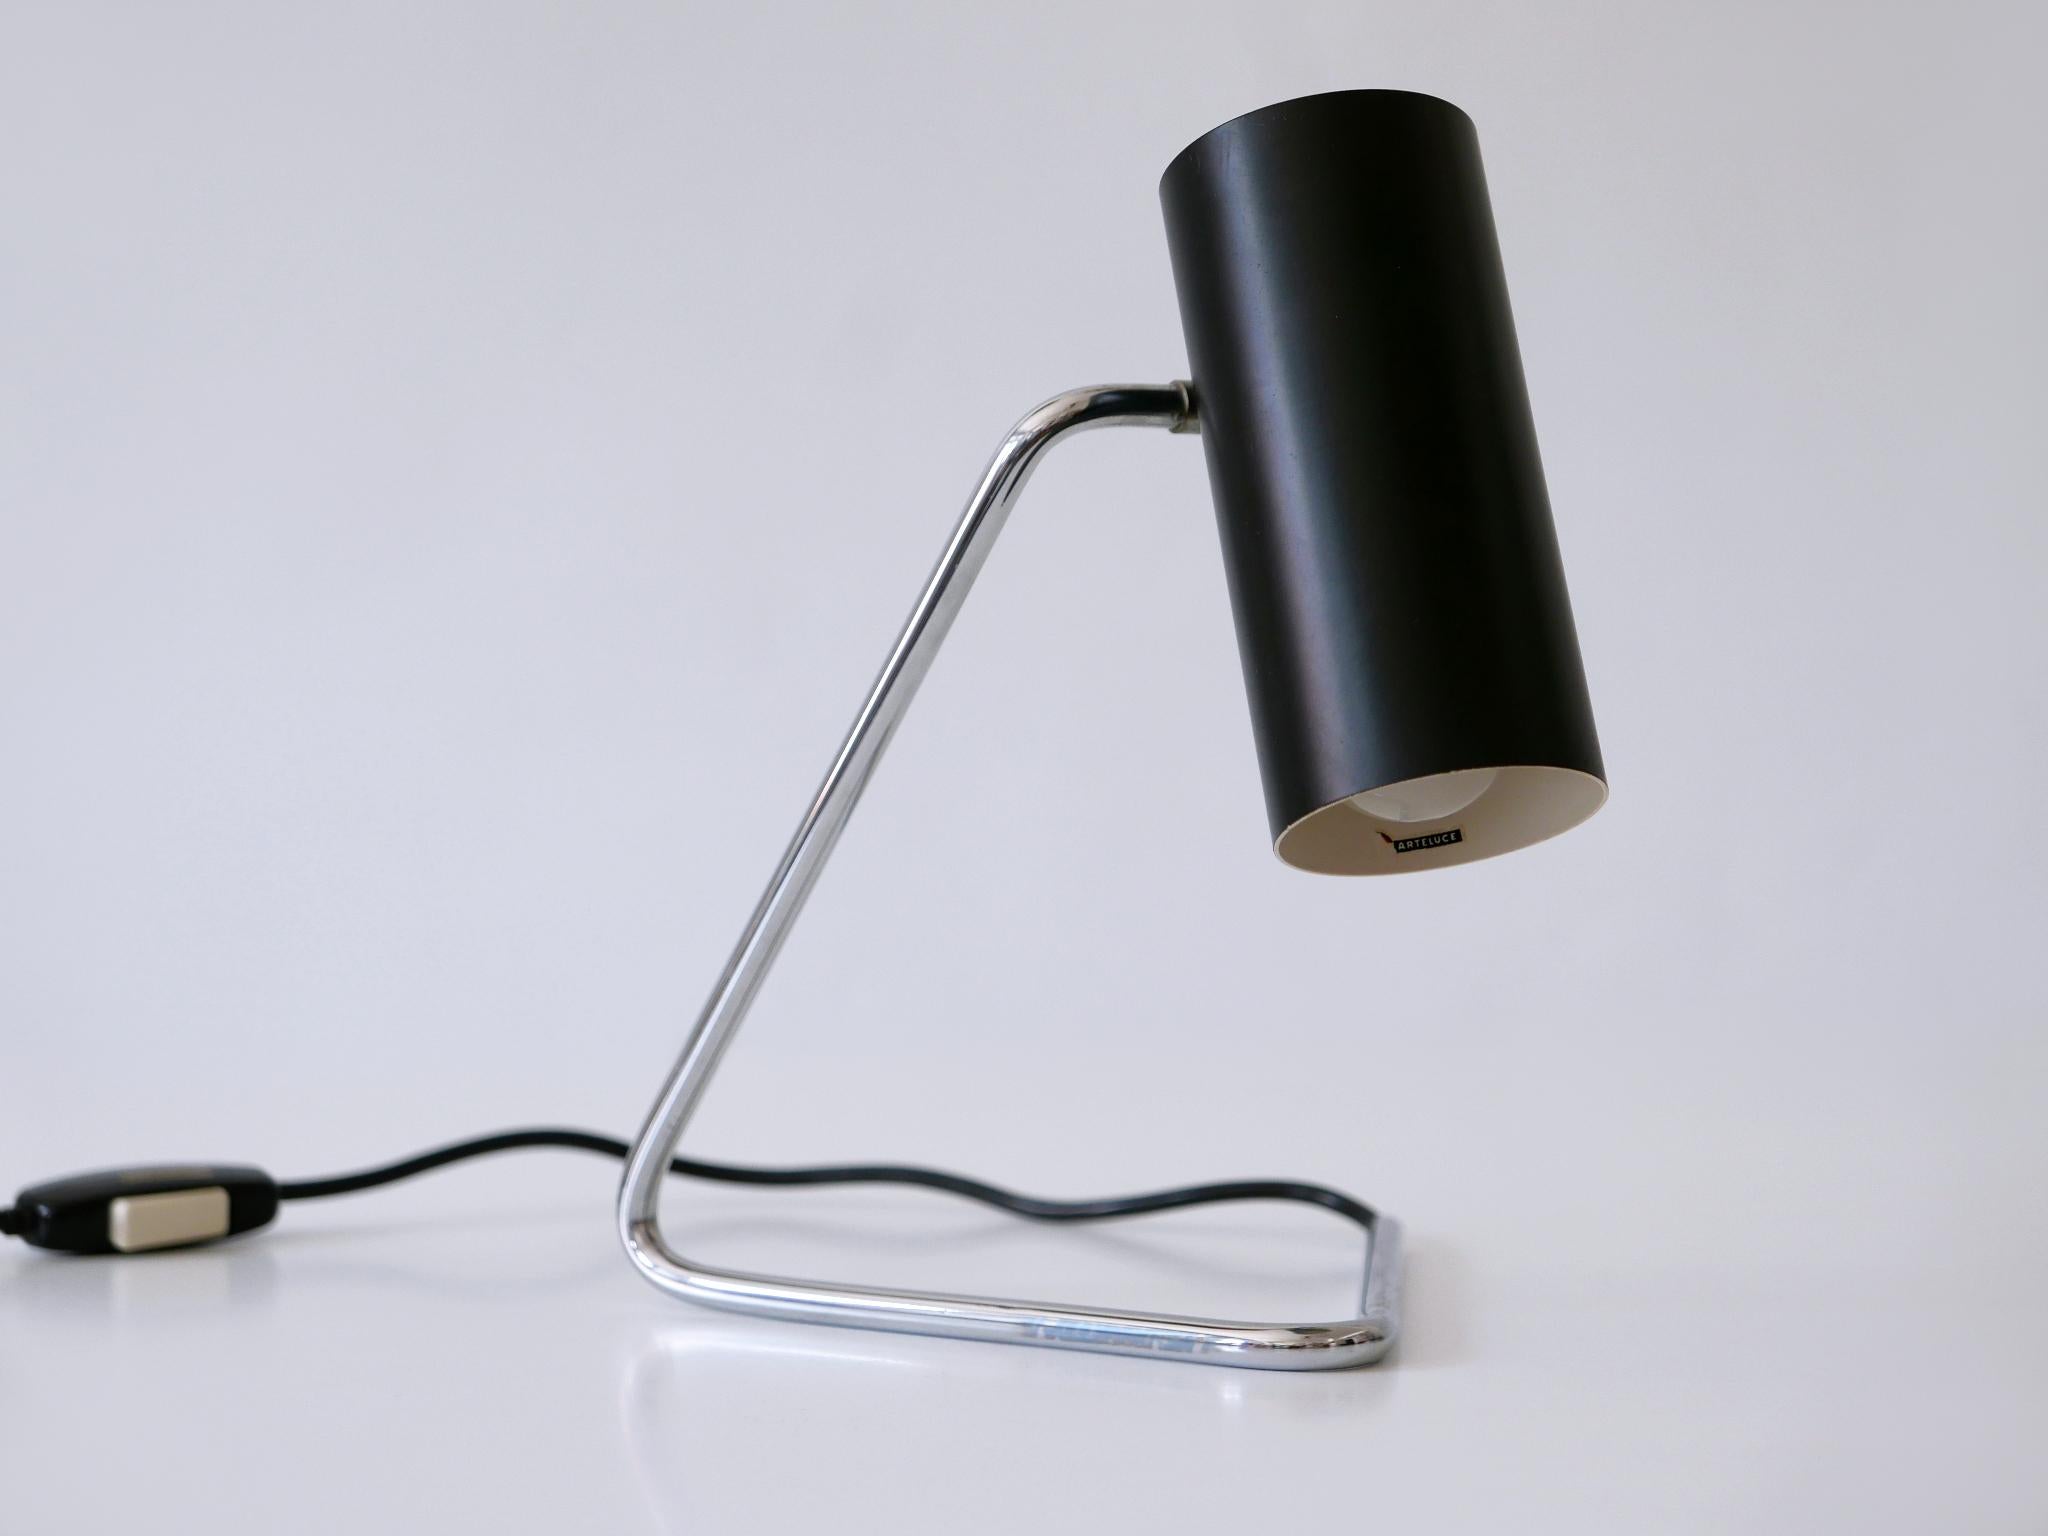 Plated Rare Mid-Century Wall or Table Lamp 551/31 B by Gino Sarfatti for Arteluce 1953